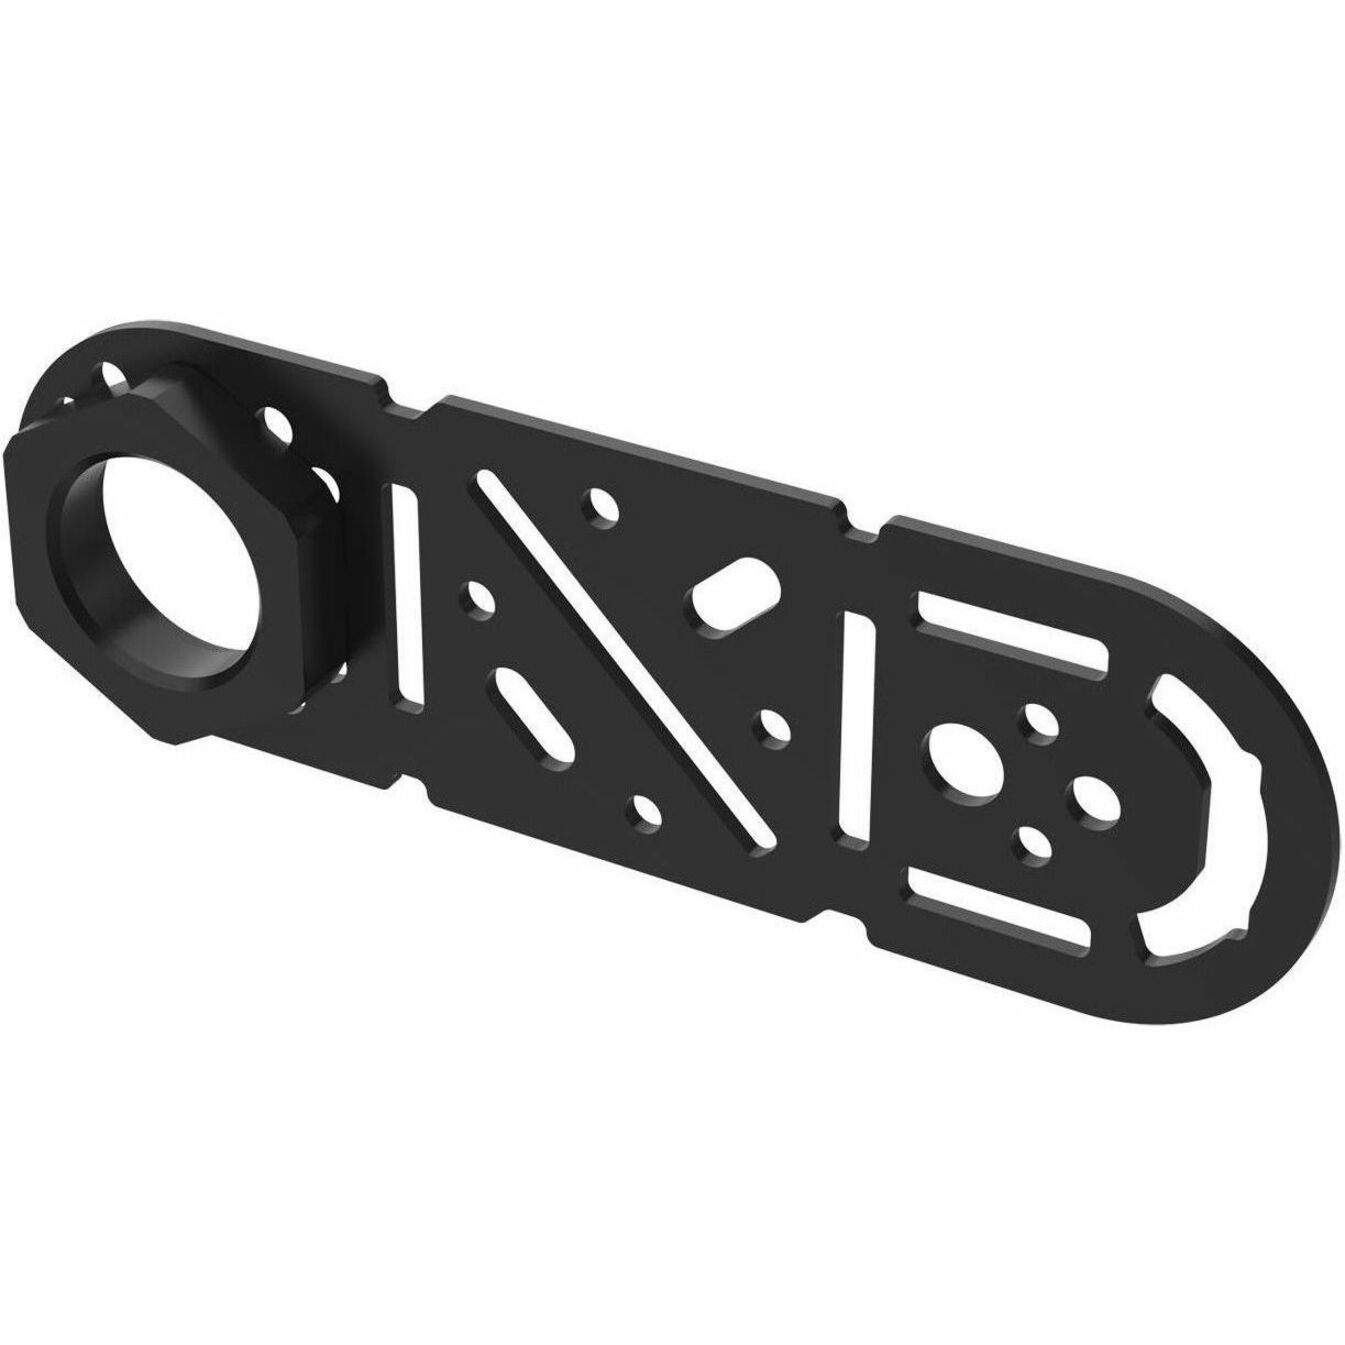 AXIS Mounting Bracket - 4 / Pack (02214-001)